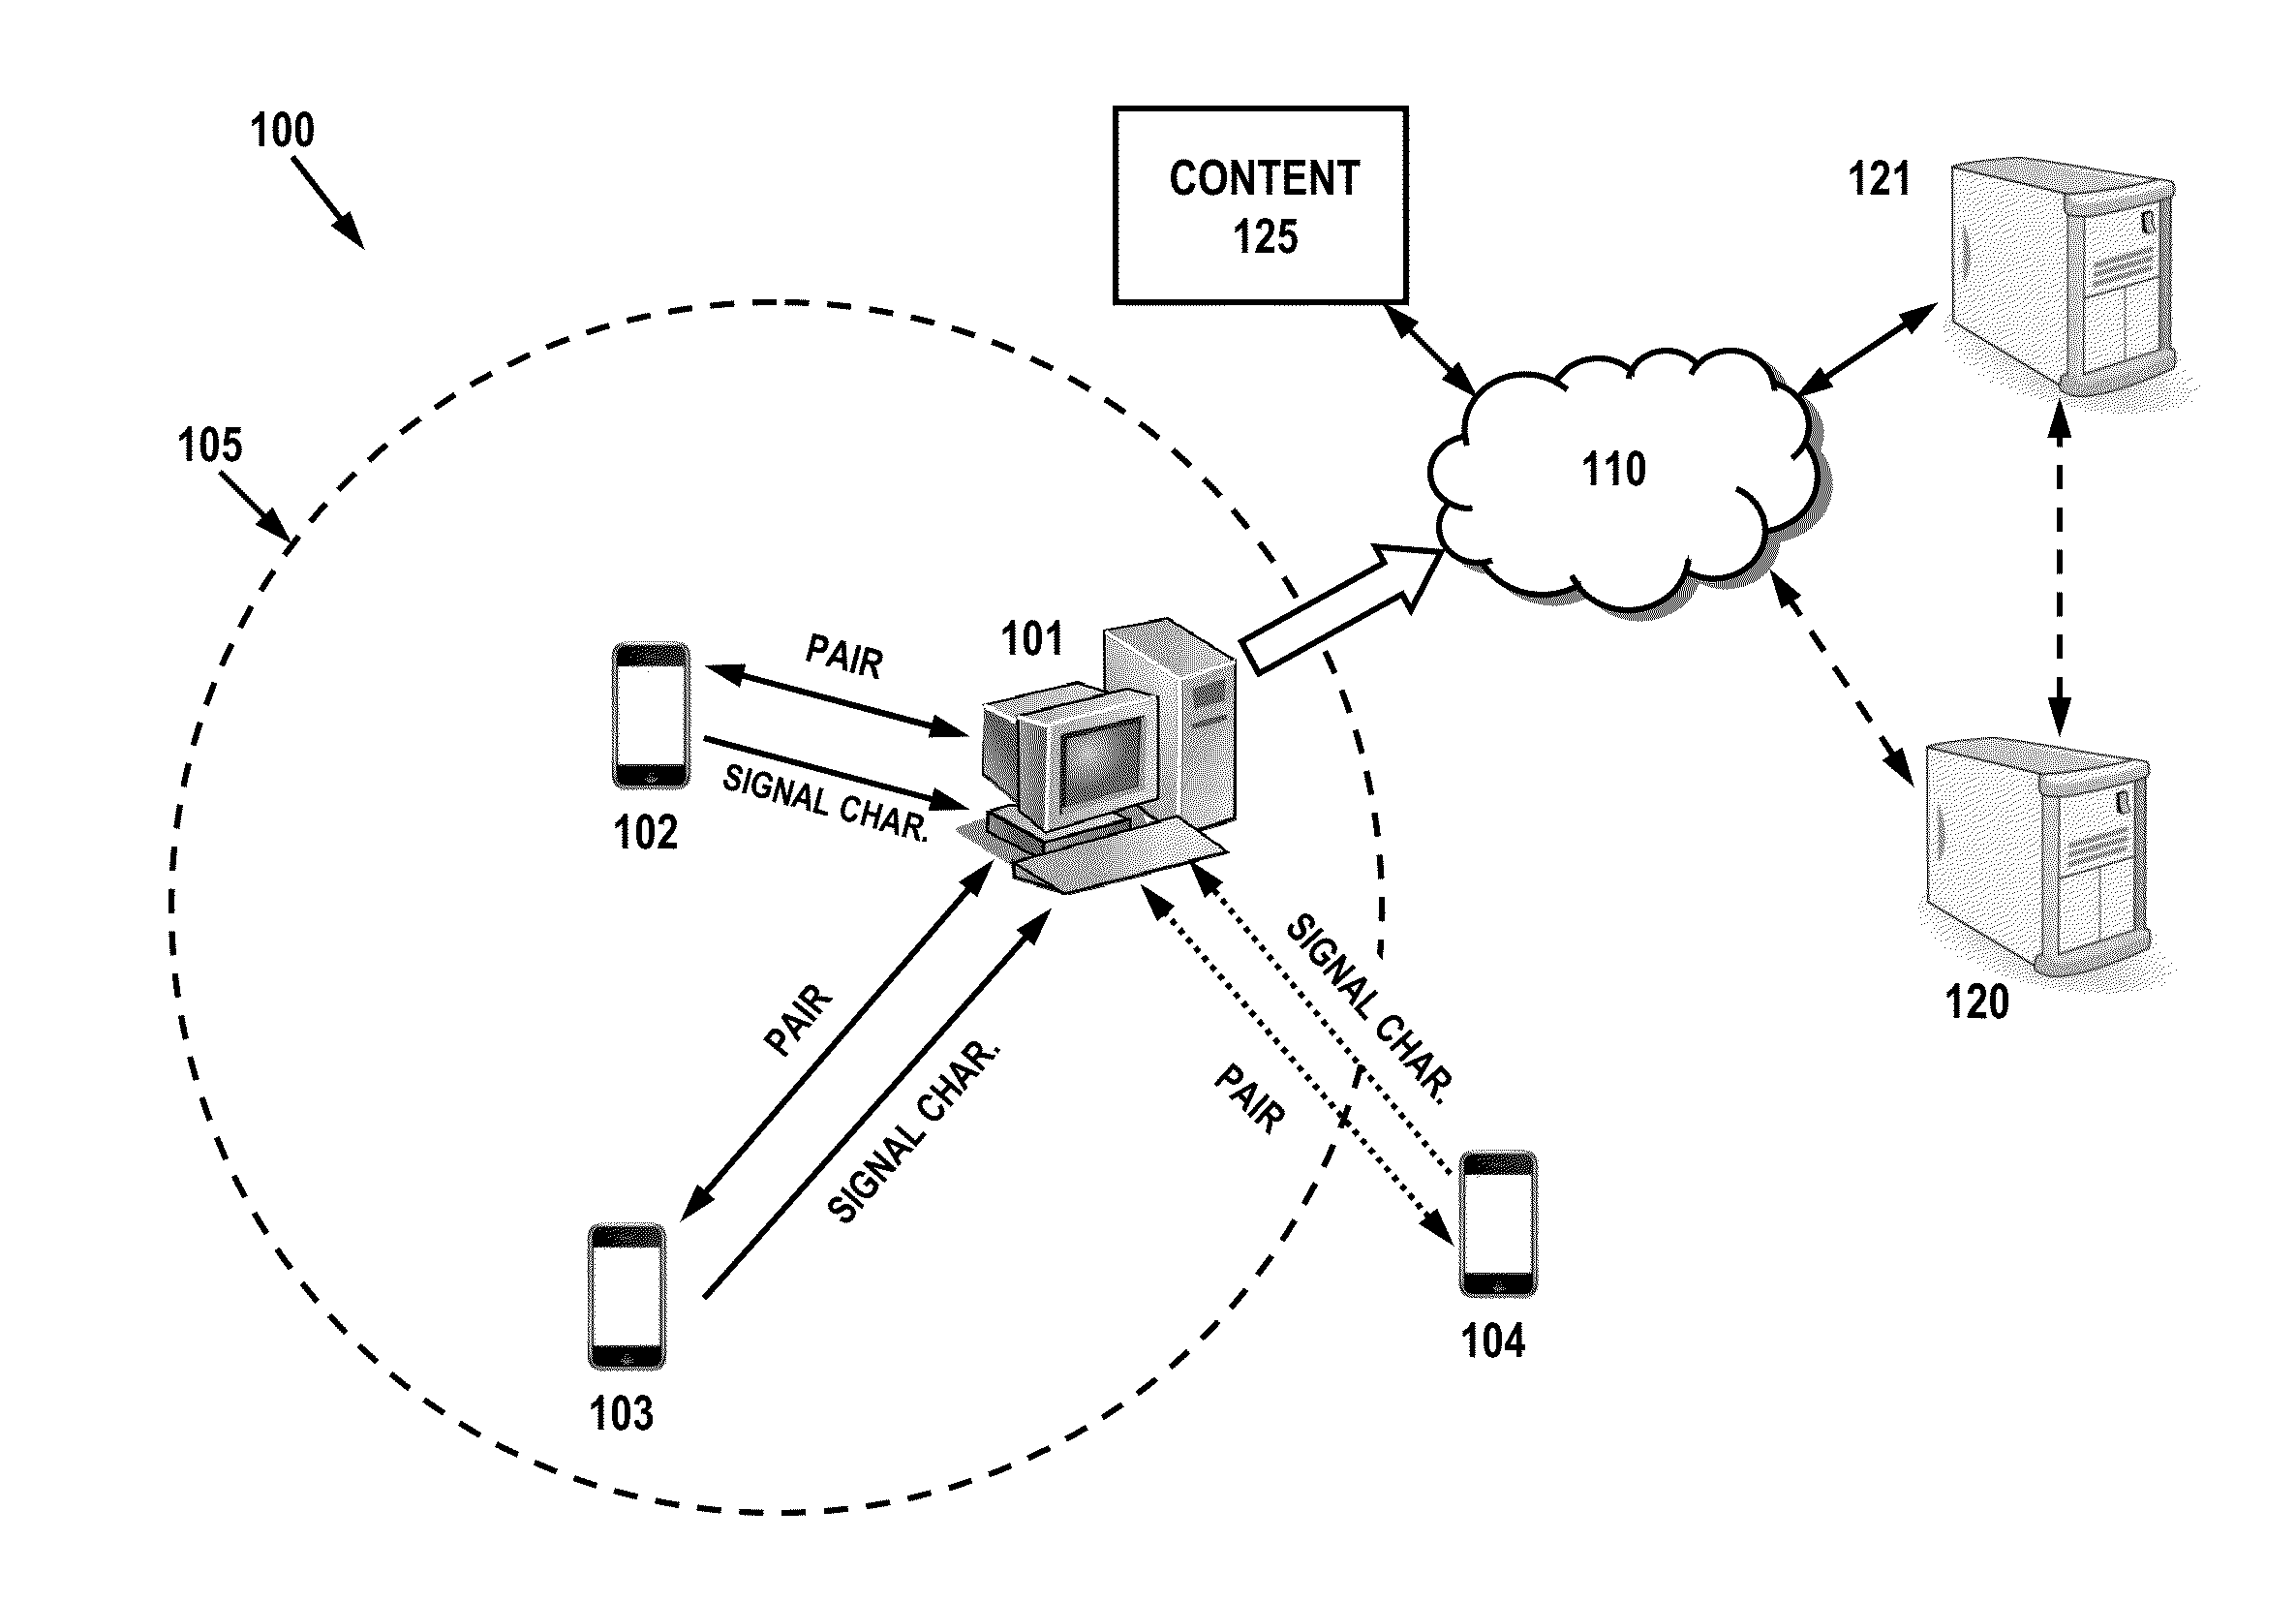 Systems and Methods for Presence Detection and Linking to Media Exposure Data